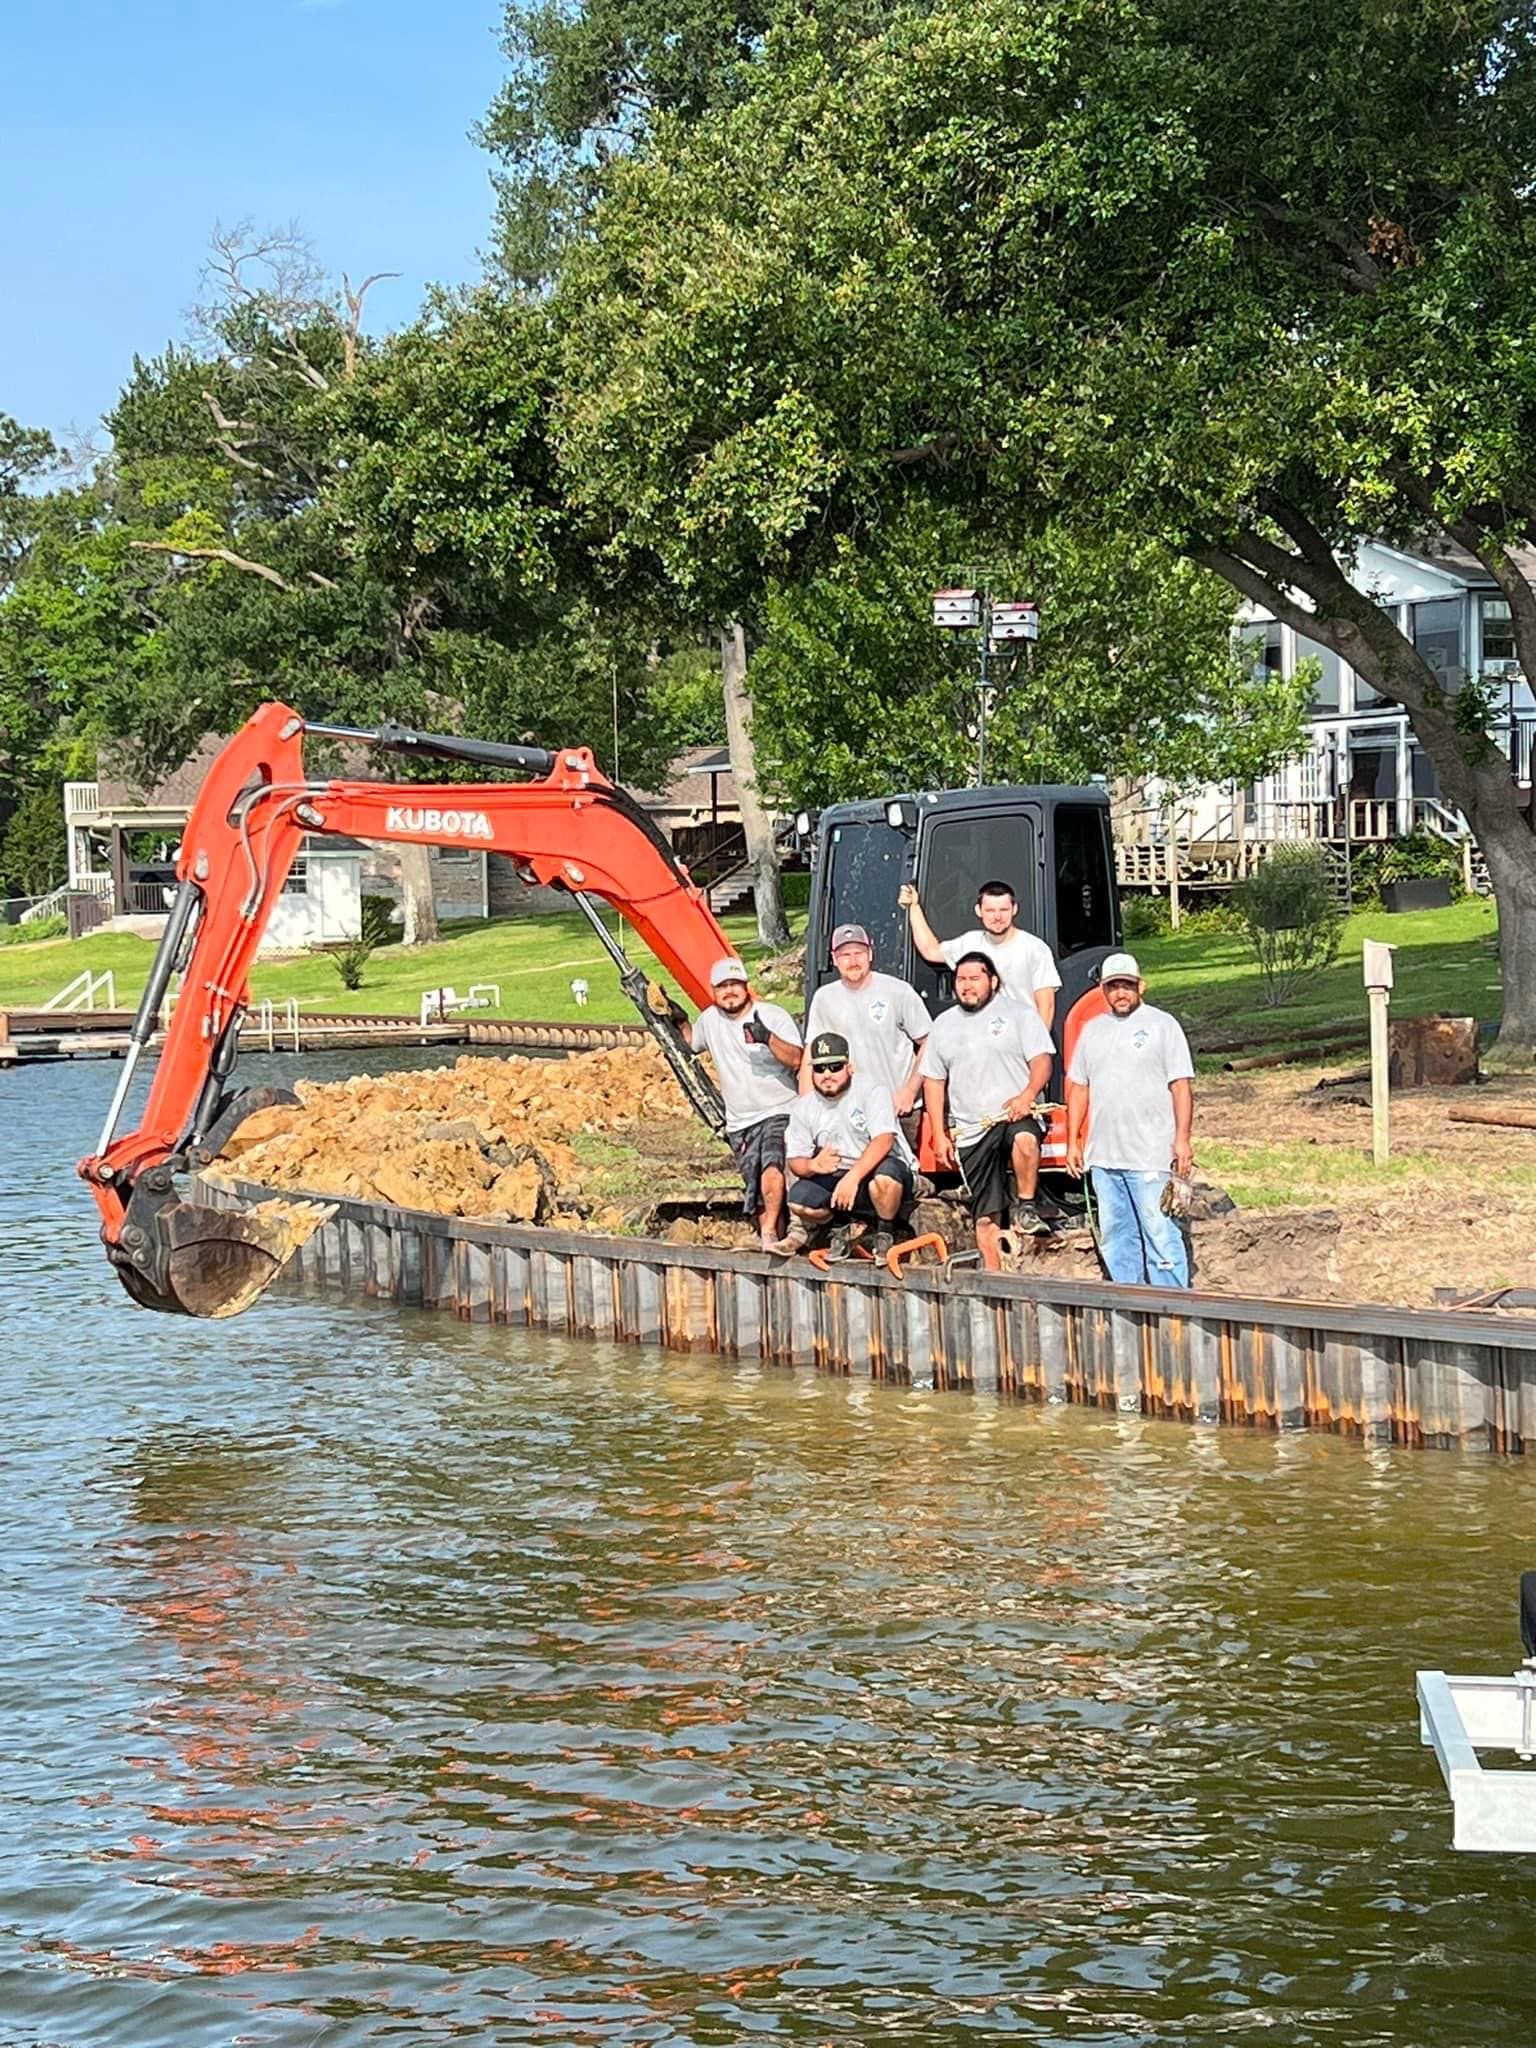 A group of men are standing next to a large excavator in the water.